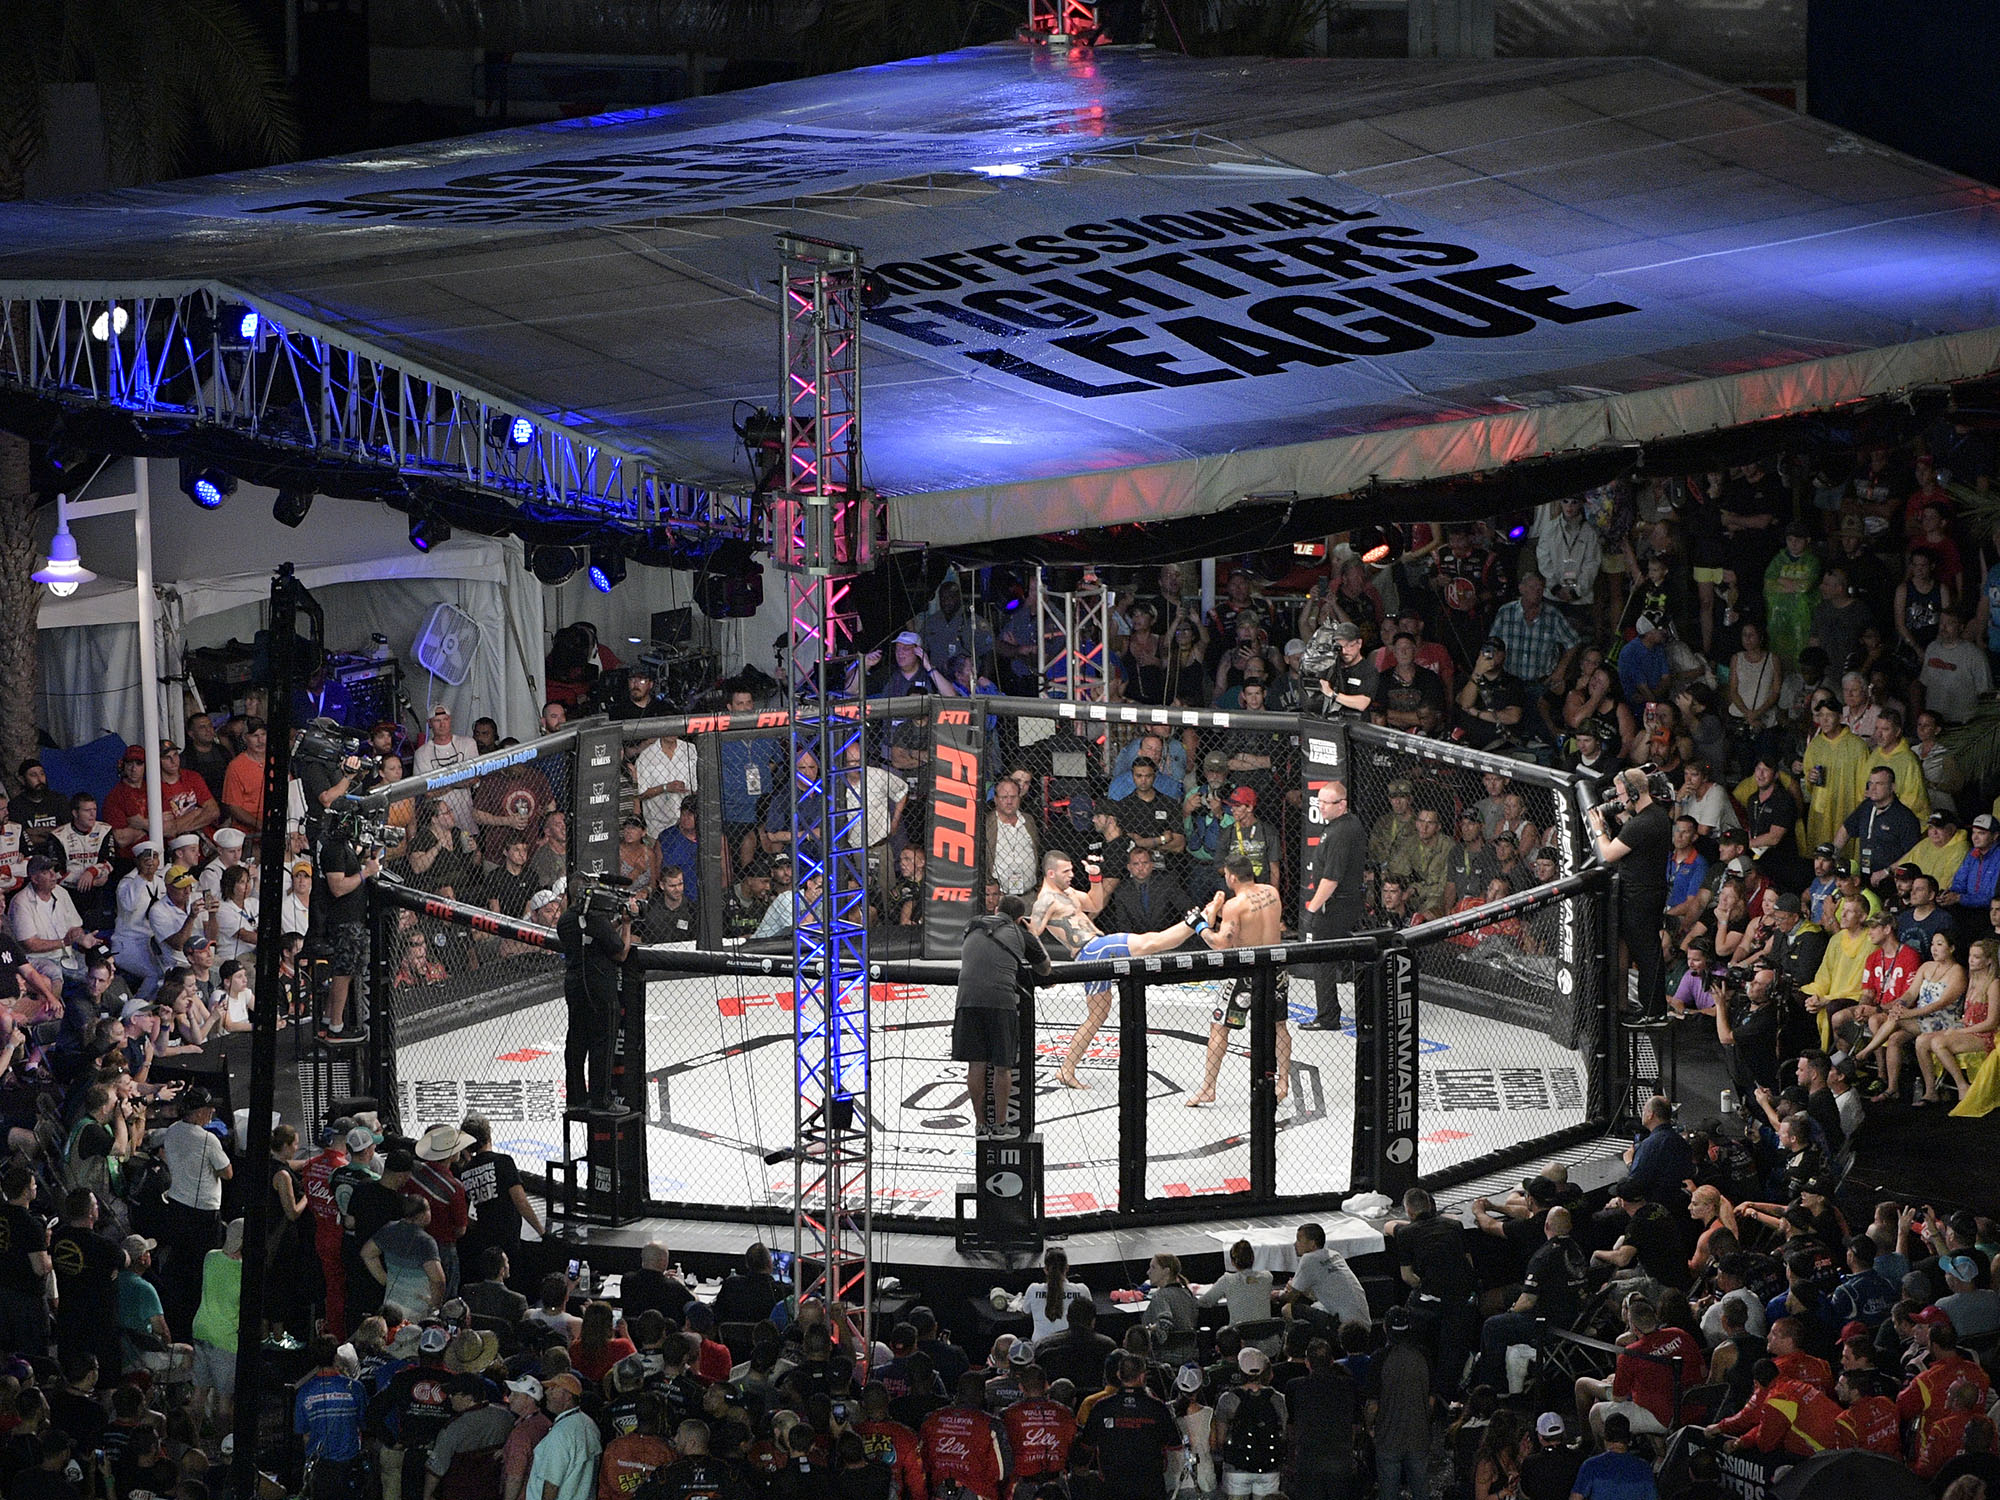 Inside the 'SmartCage': Data Sits at the Center of the Professional Fighters  League Universe